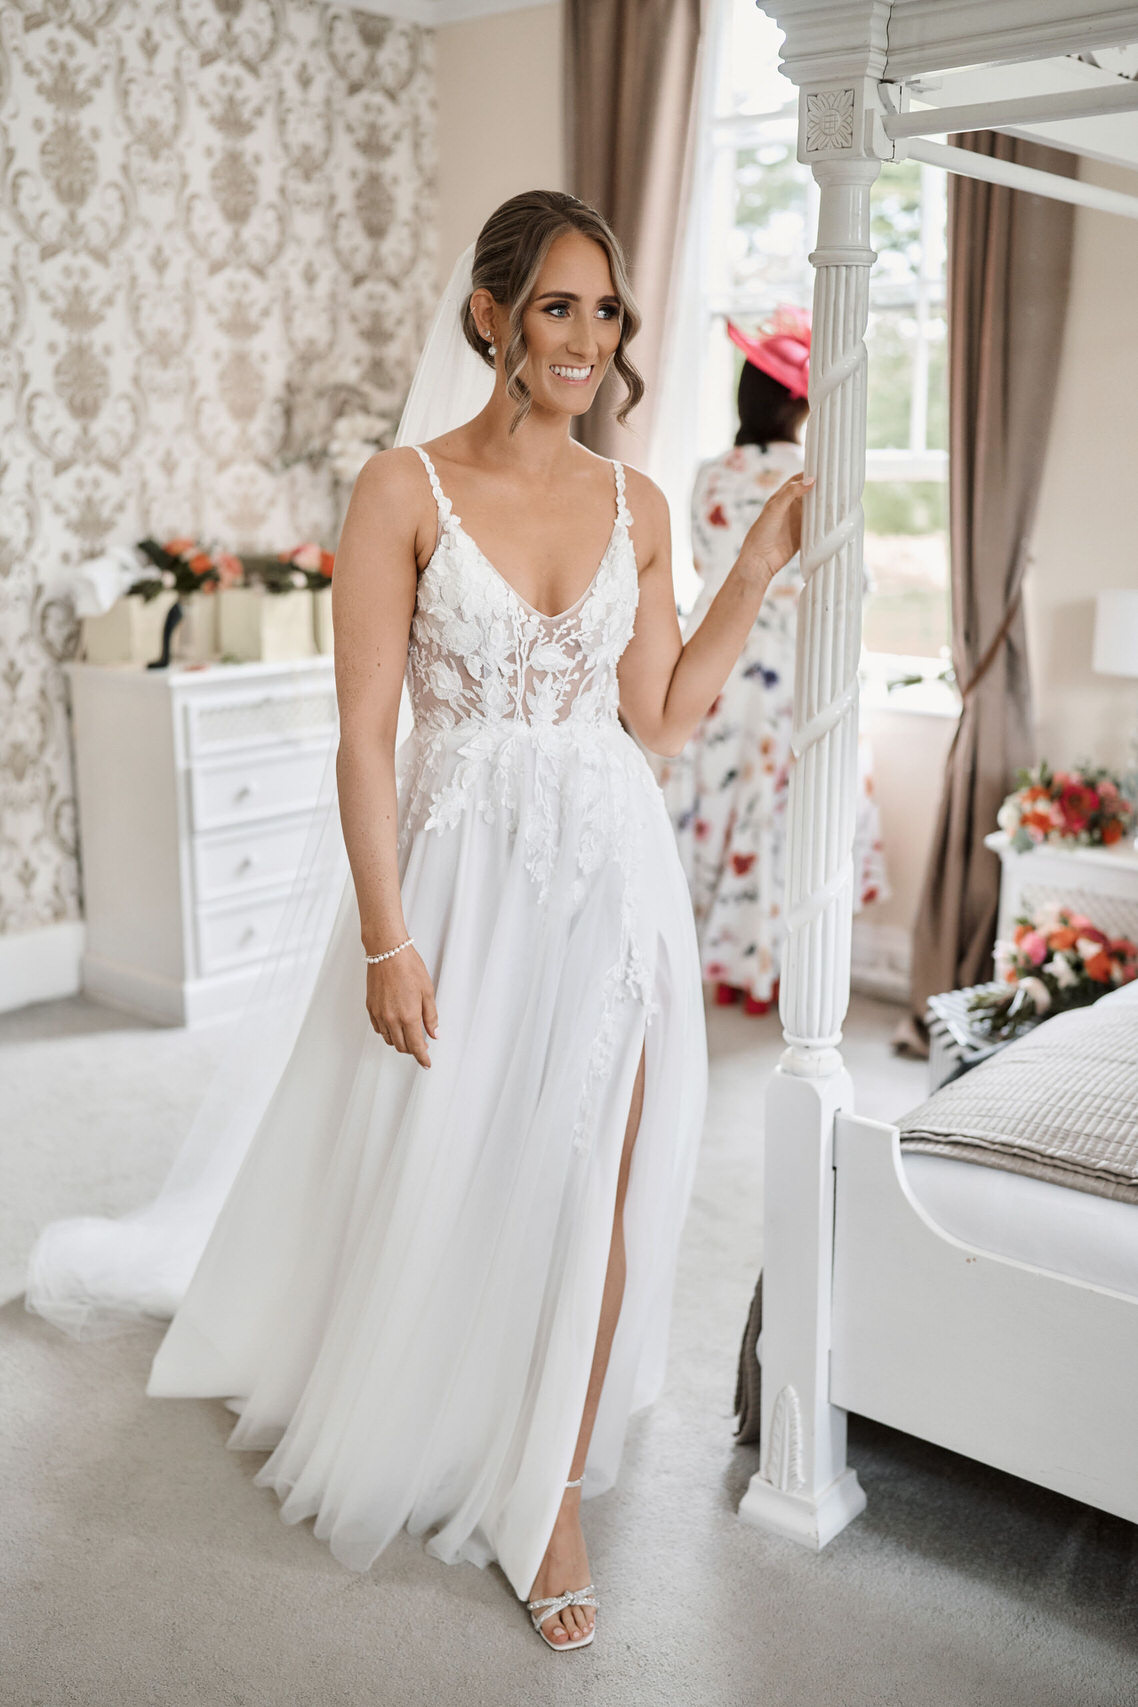 A bride in a white wedding dress standing in front of a four poster bed.